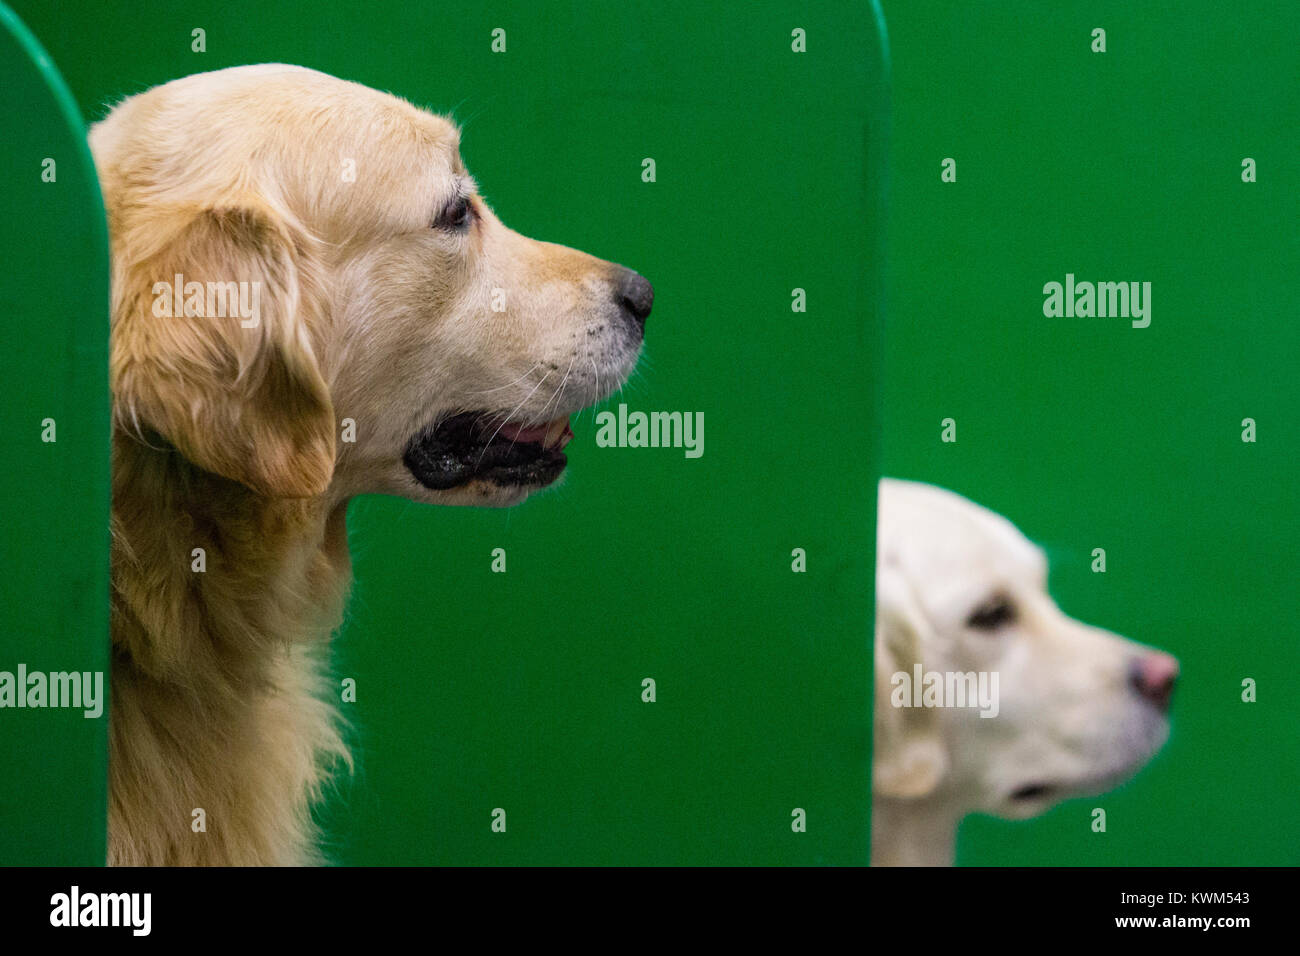 Two Golden Retrievers from the Southern Golden Retriever Display Team rest before their show. Discover Dogs sponsored by Eukanuba opens at the ExCel Exhibition Centre in Docklands. The show, organised by the Kennel Club, is London's biggest dog event. Stock Photo